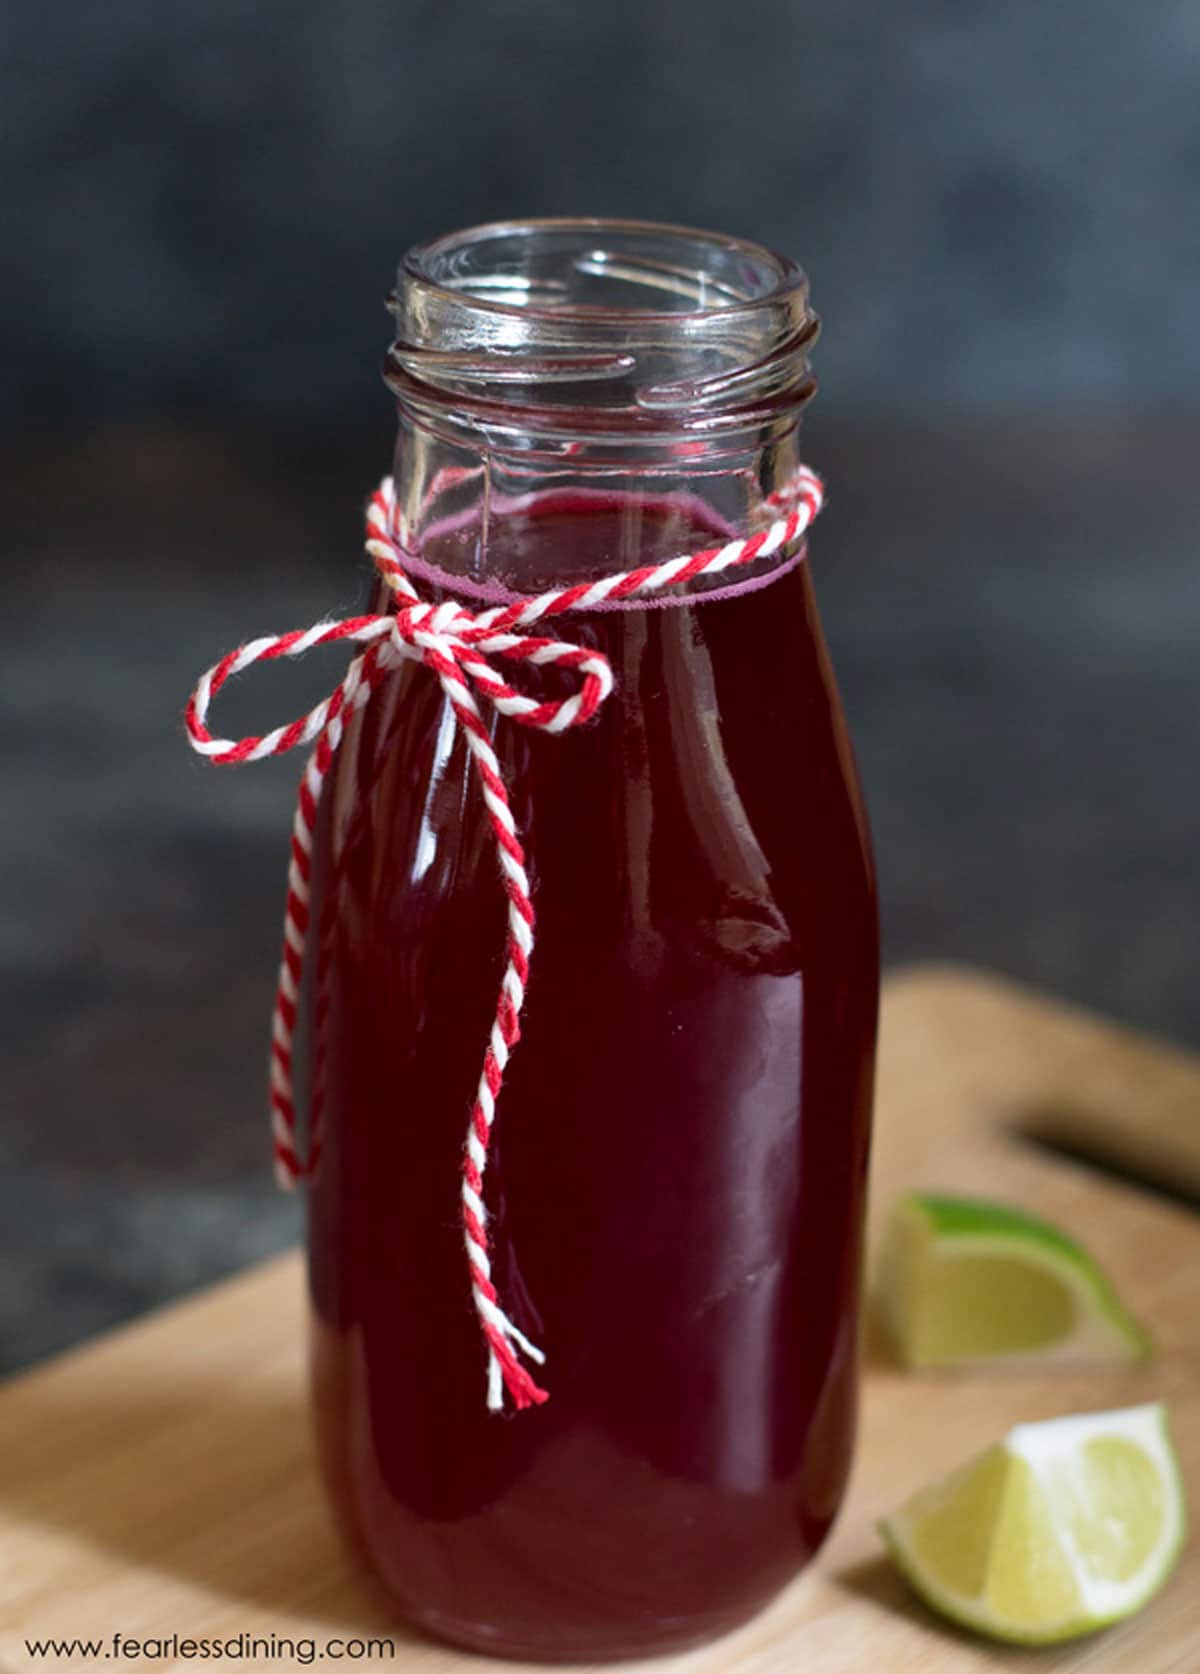 Prickly Pear Syrup is a Free Recipe by Sandi Gaertner from Fearless Dining!